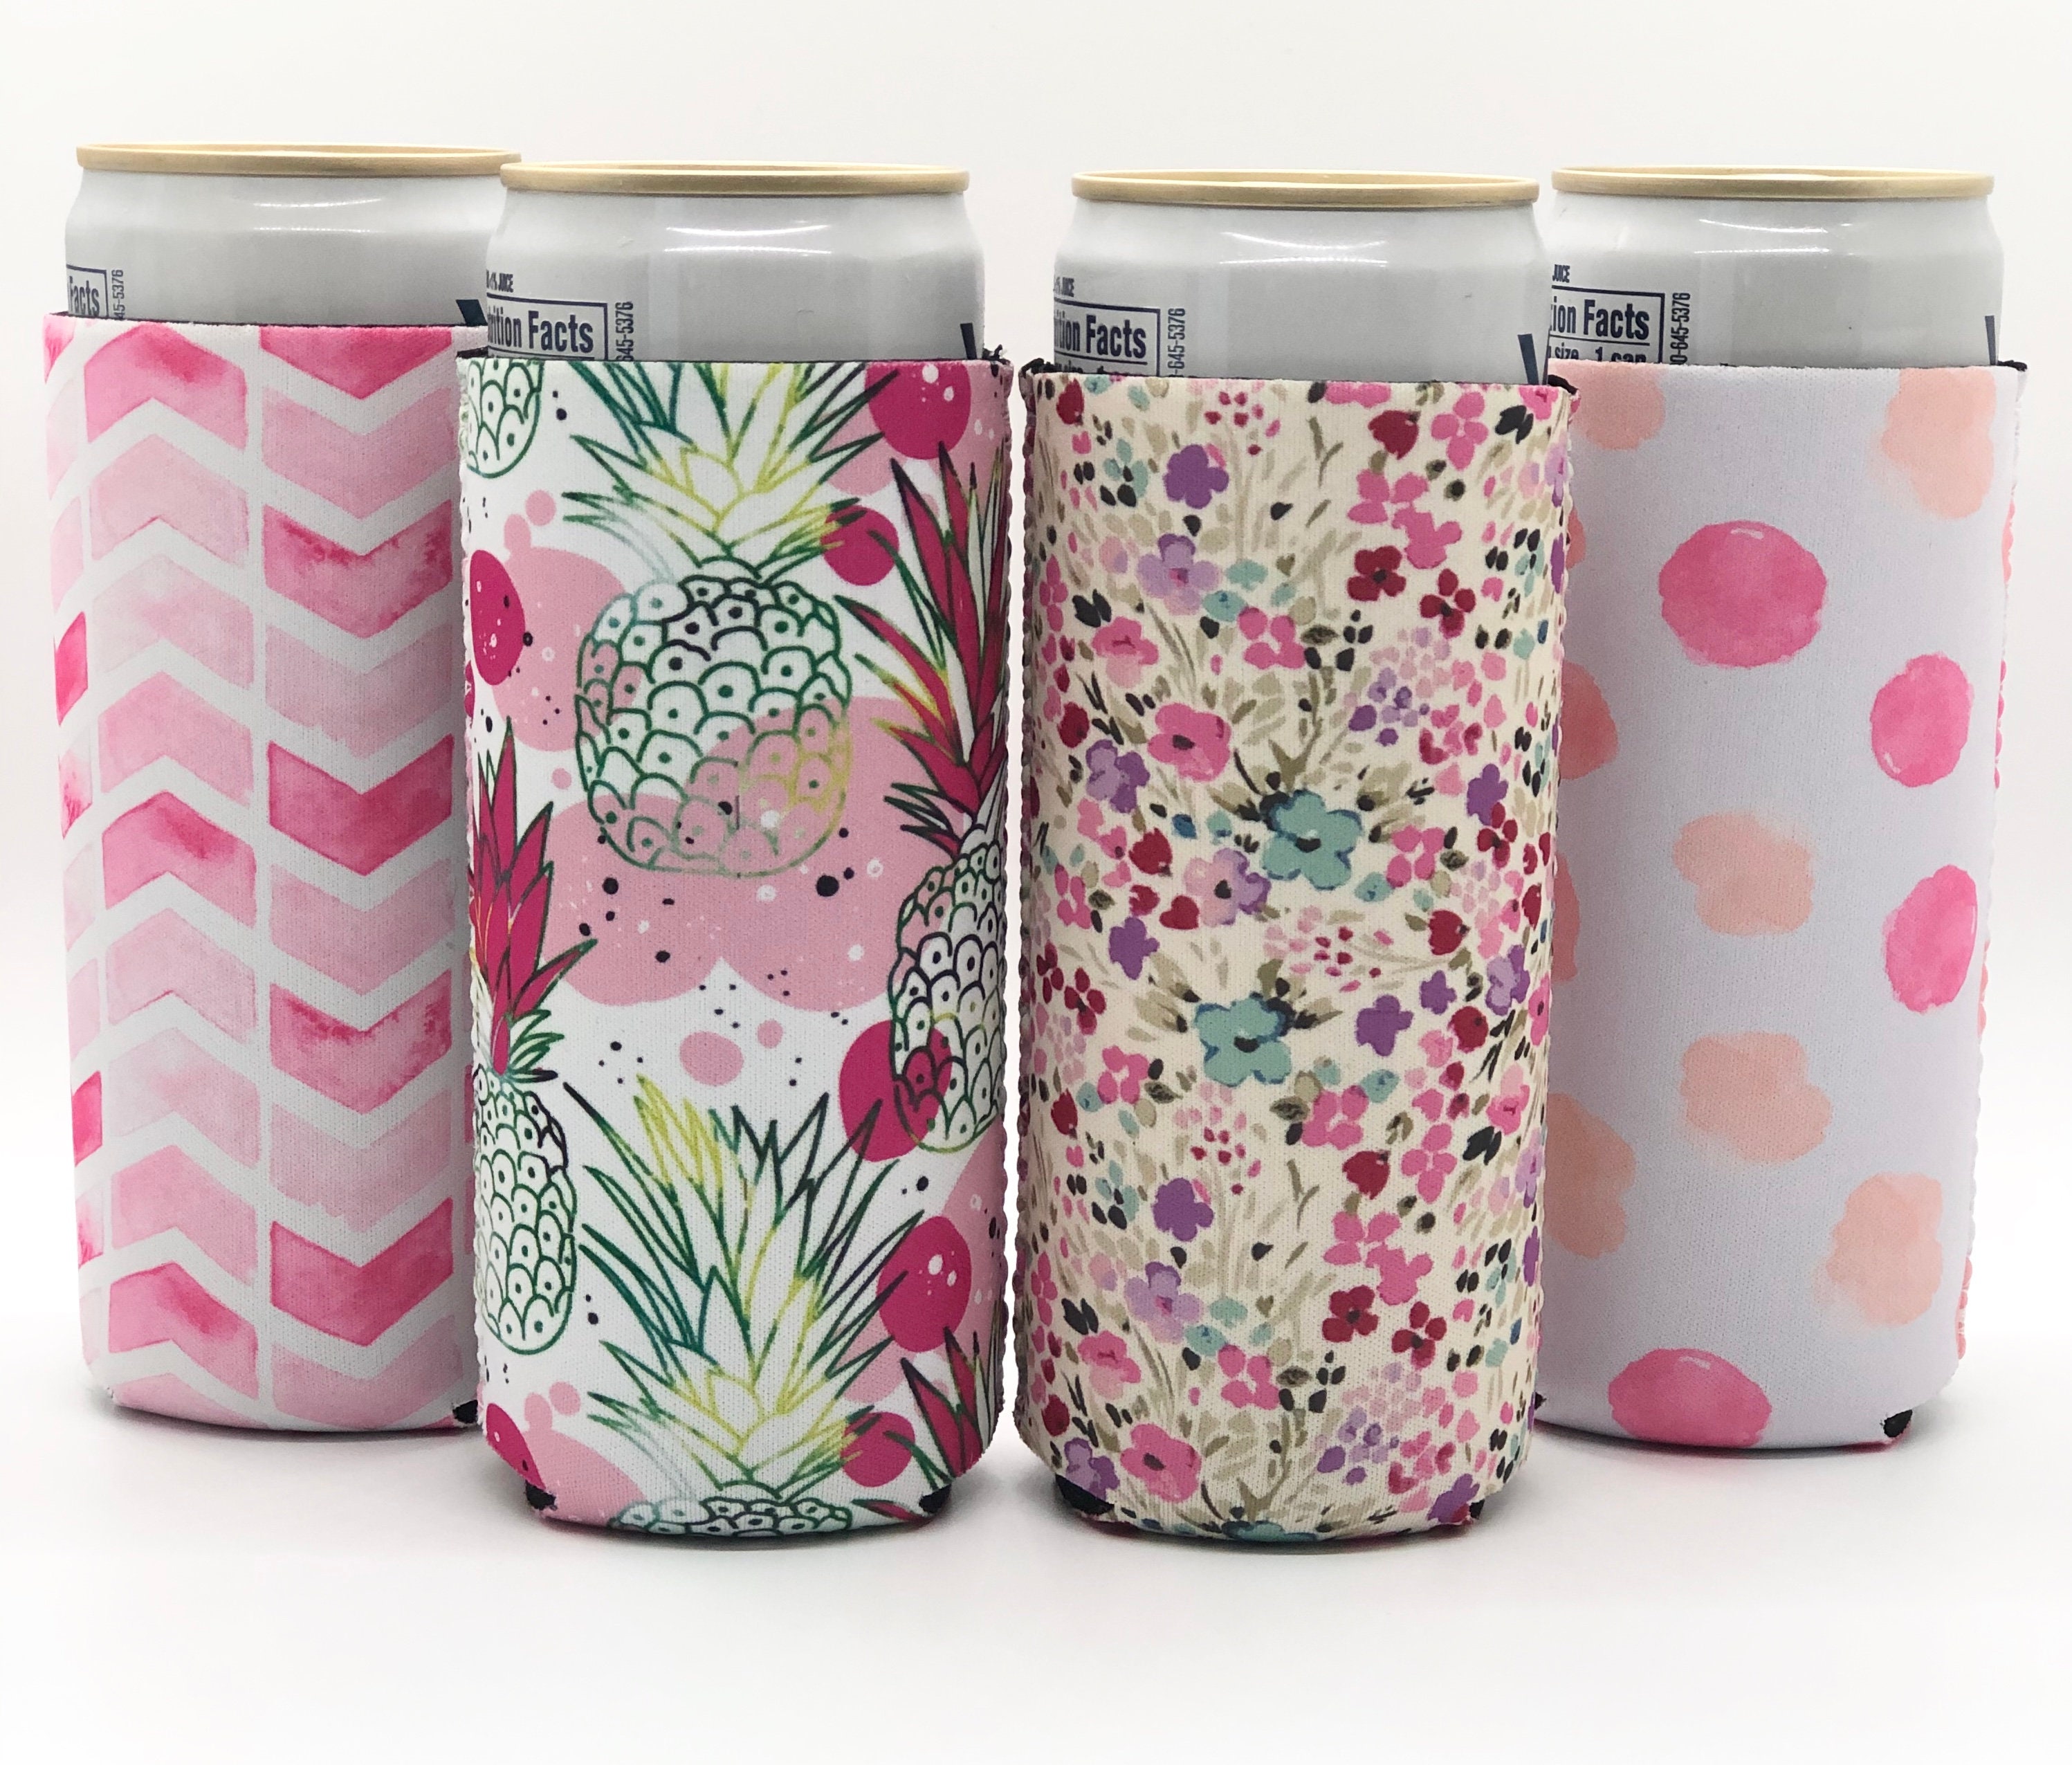 Mom of the Year Seltzer Koozie – Polished Prints